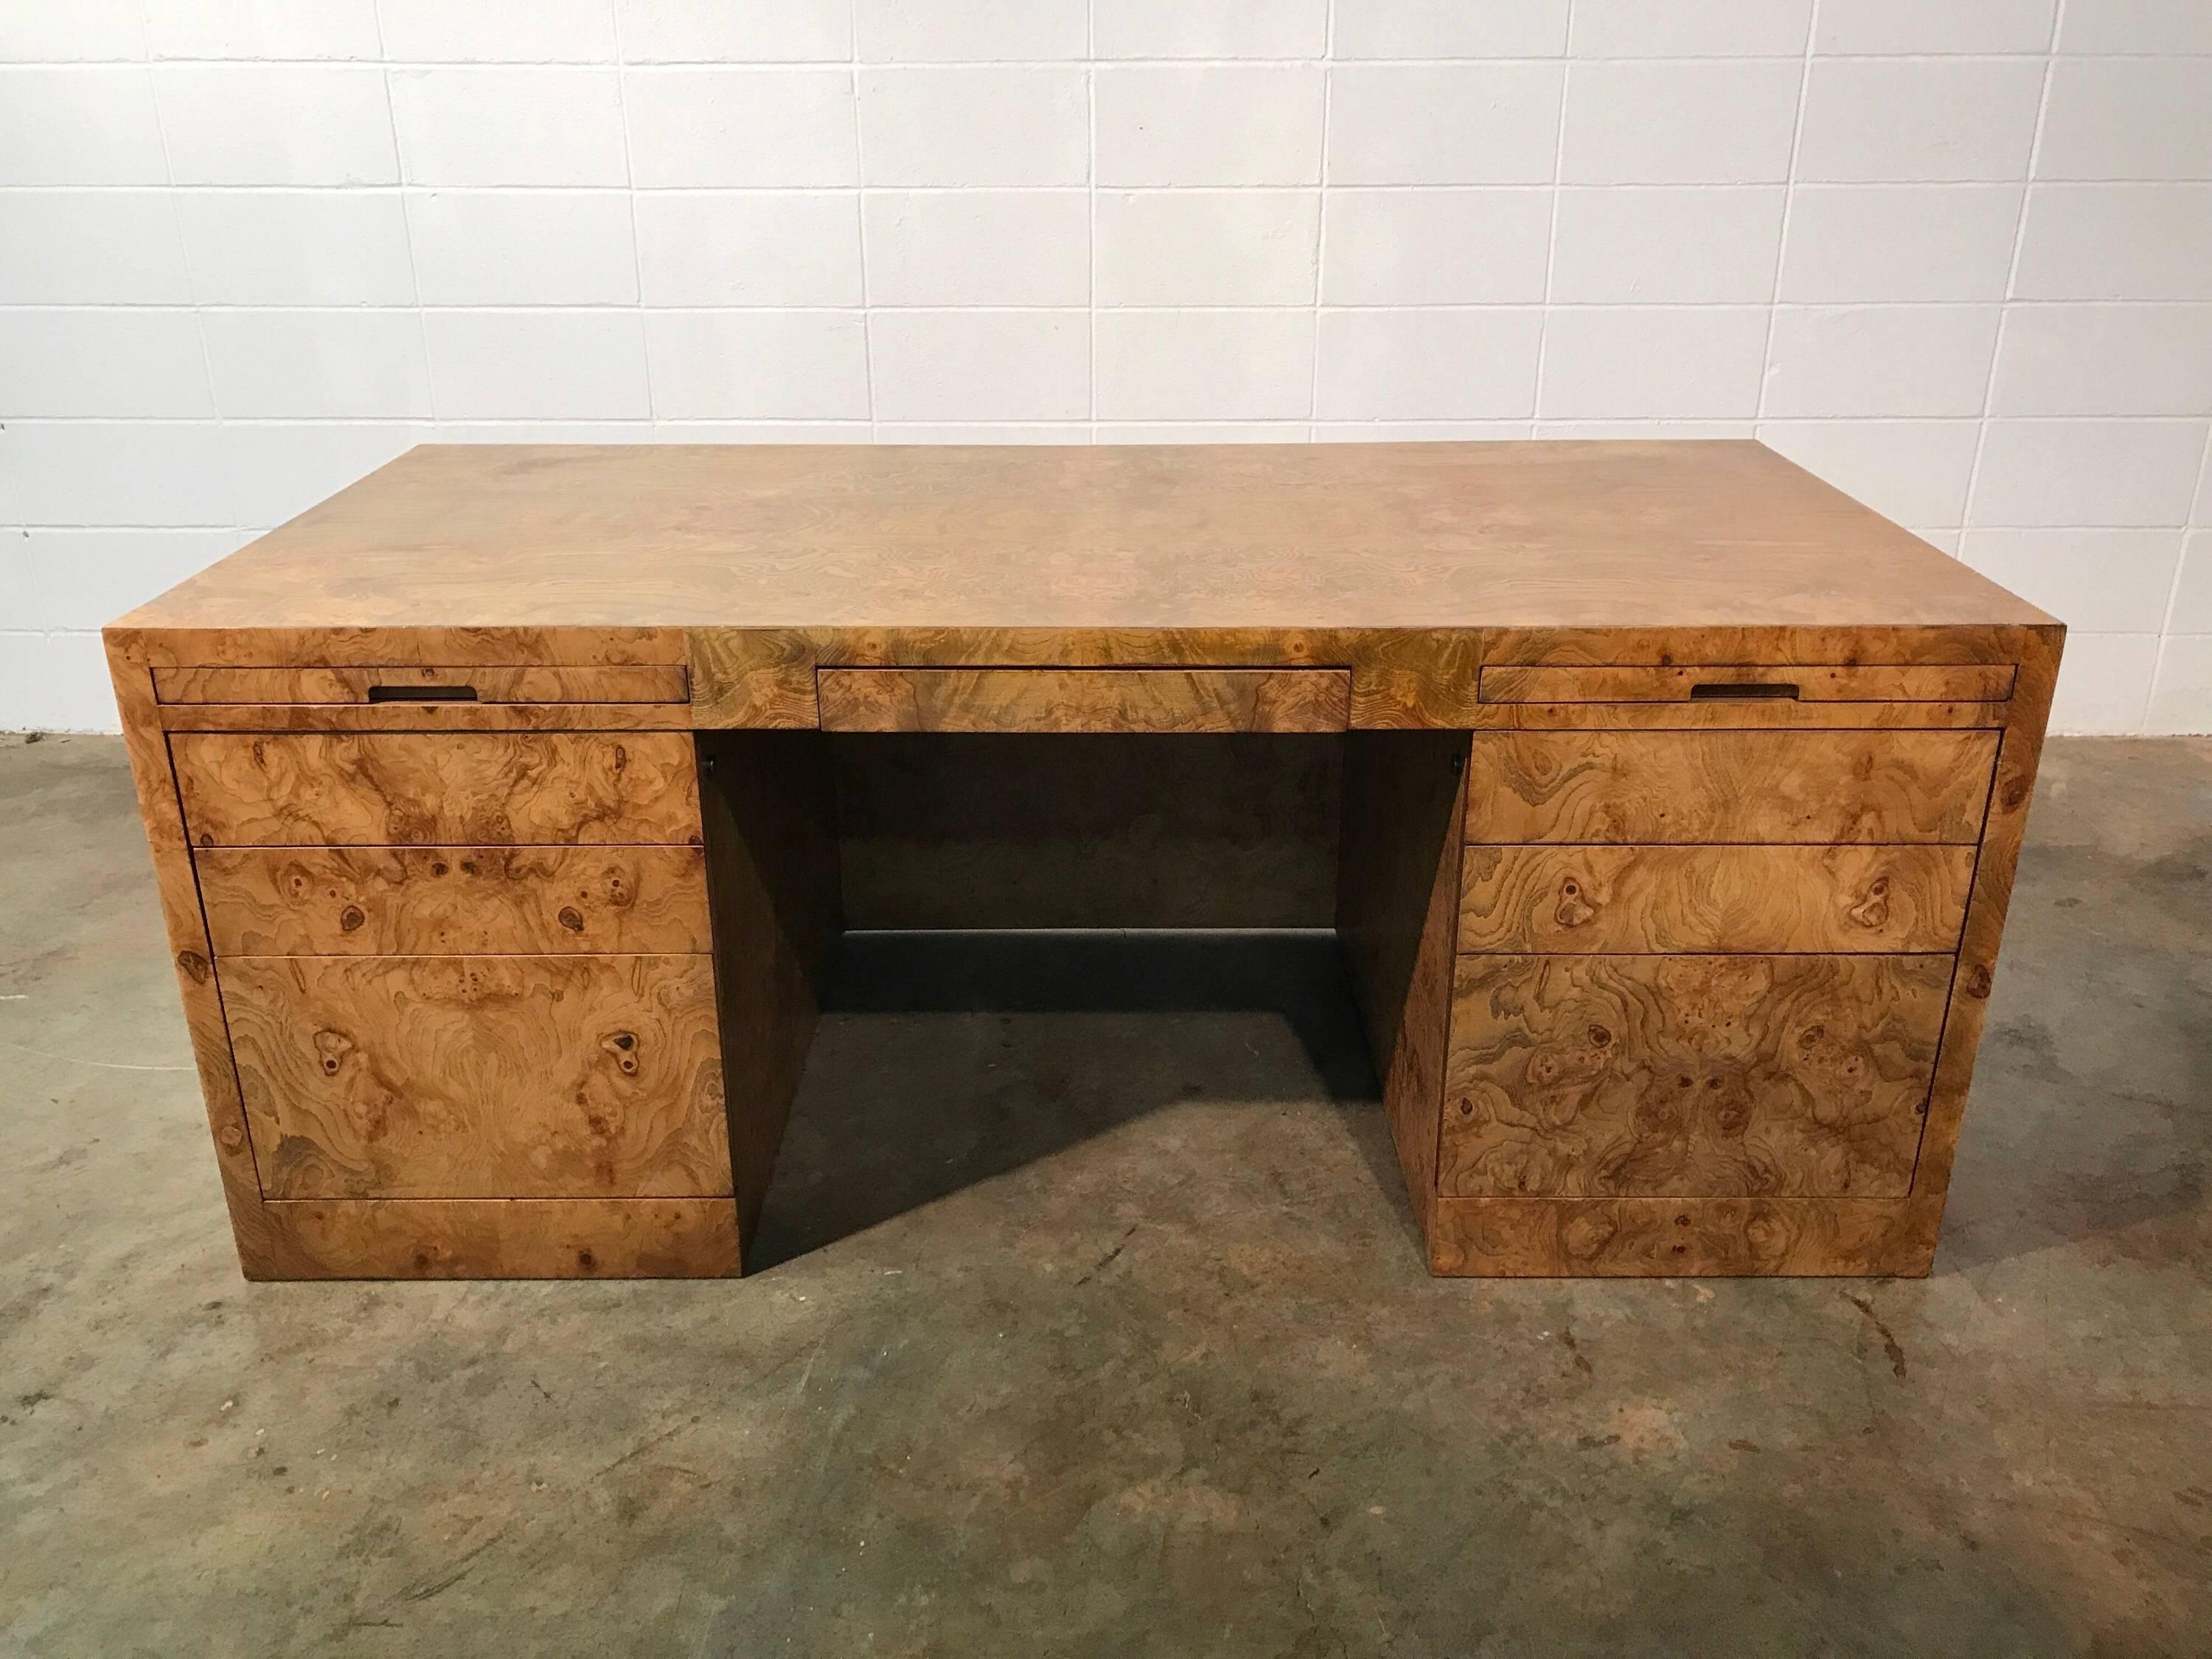 Midcentury executive desk in burl wood by Directional Furniture
Amazing executive desk fully wrapped in burl = show stopper
Desk features seven drawers and two pull-out surfaces for ample work space. Very solid and high quality craftsmanship. Desk